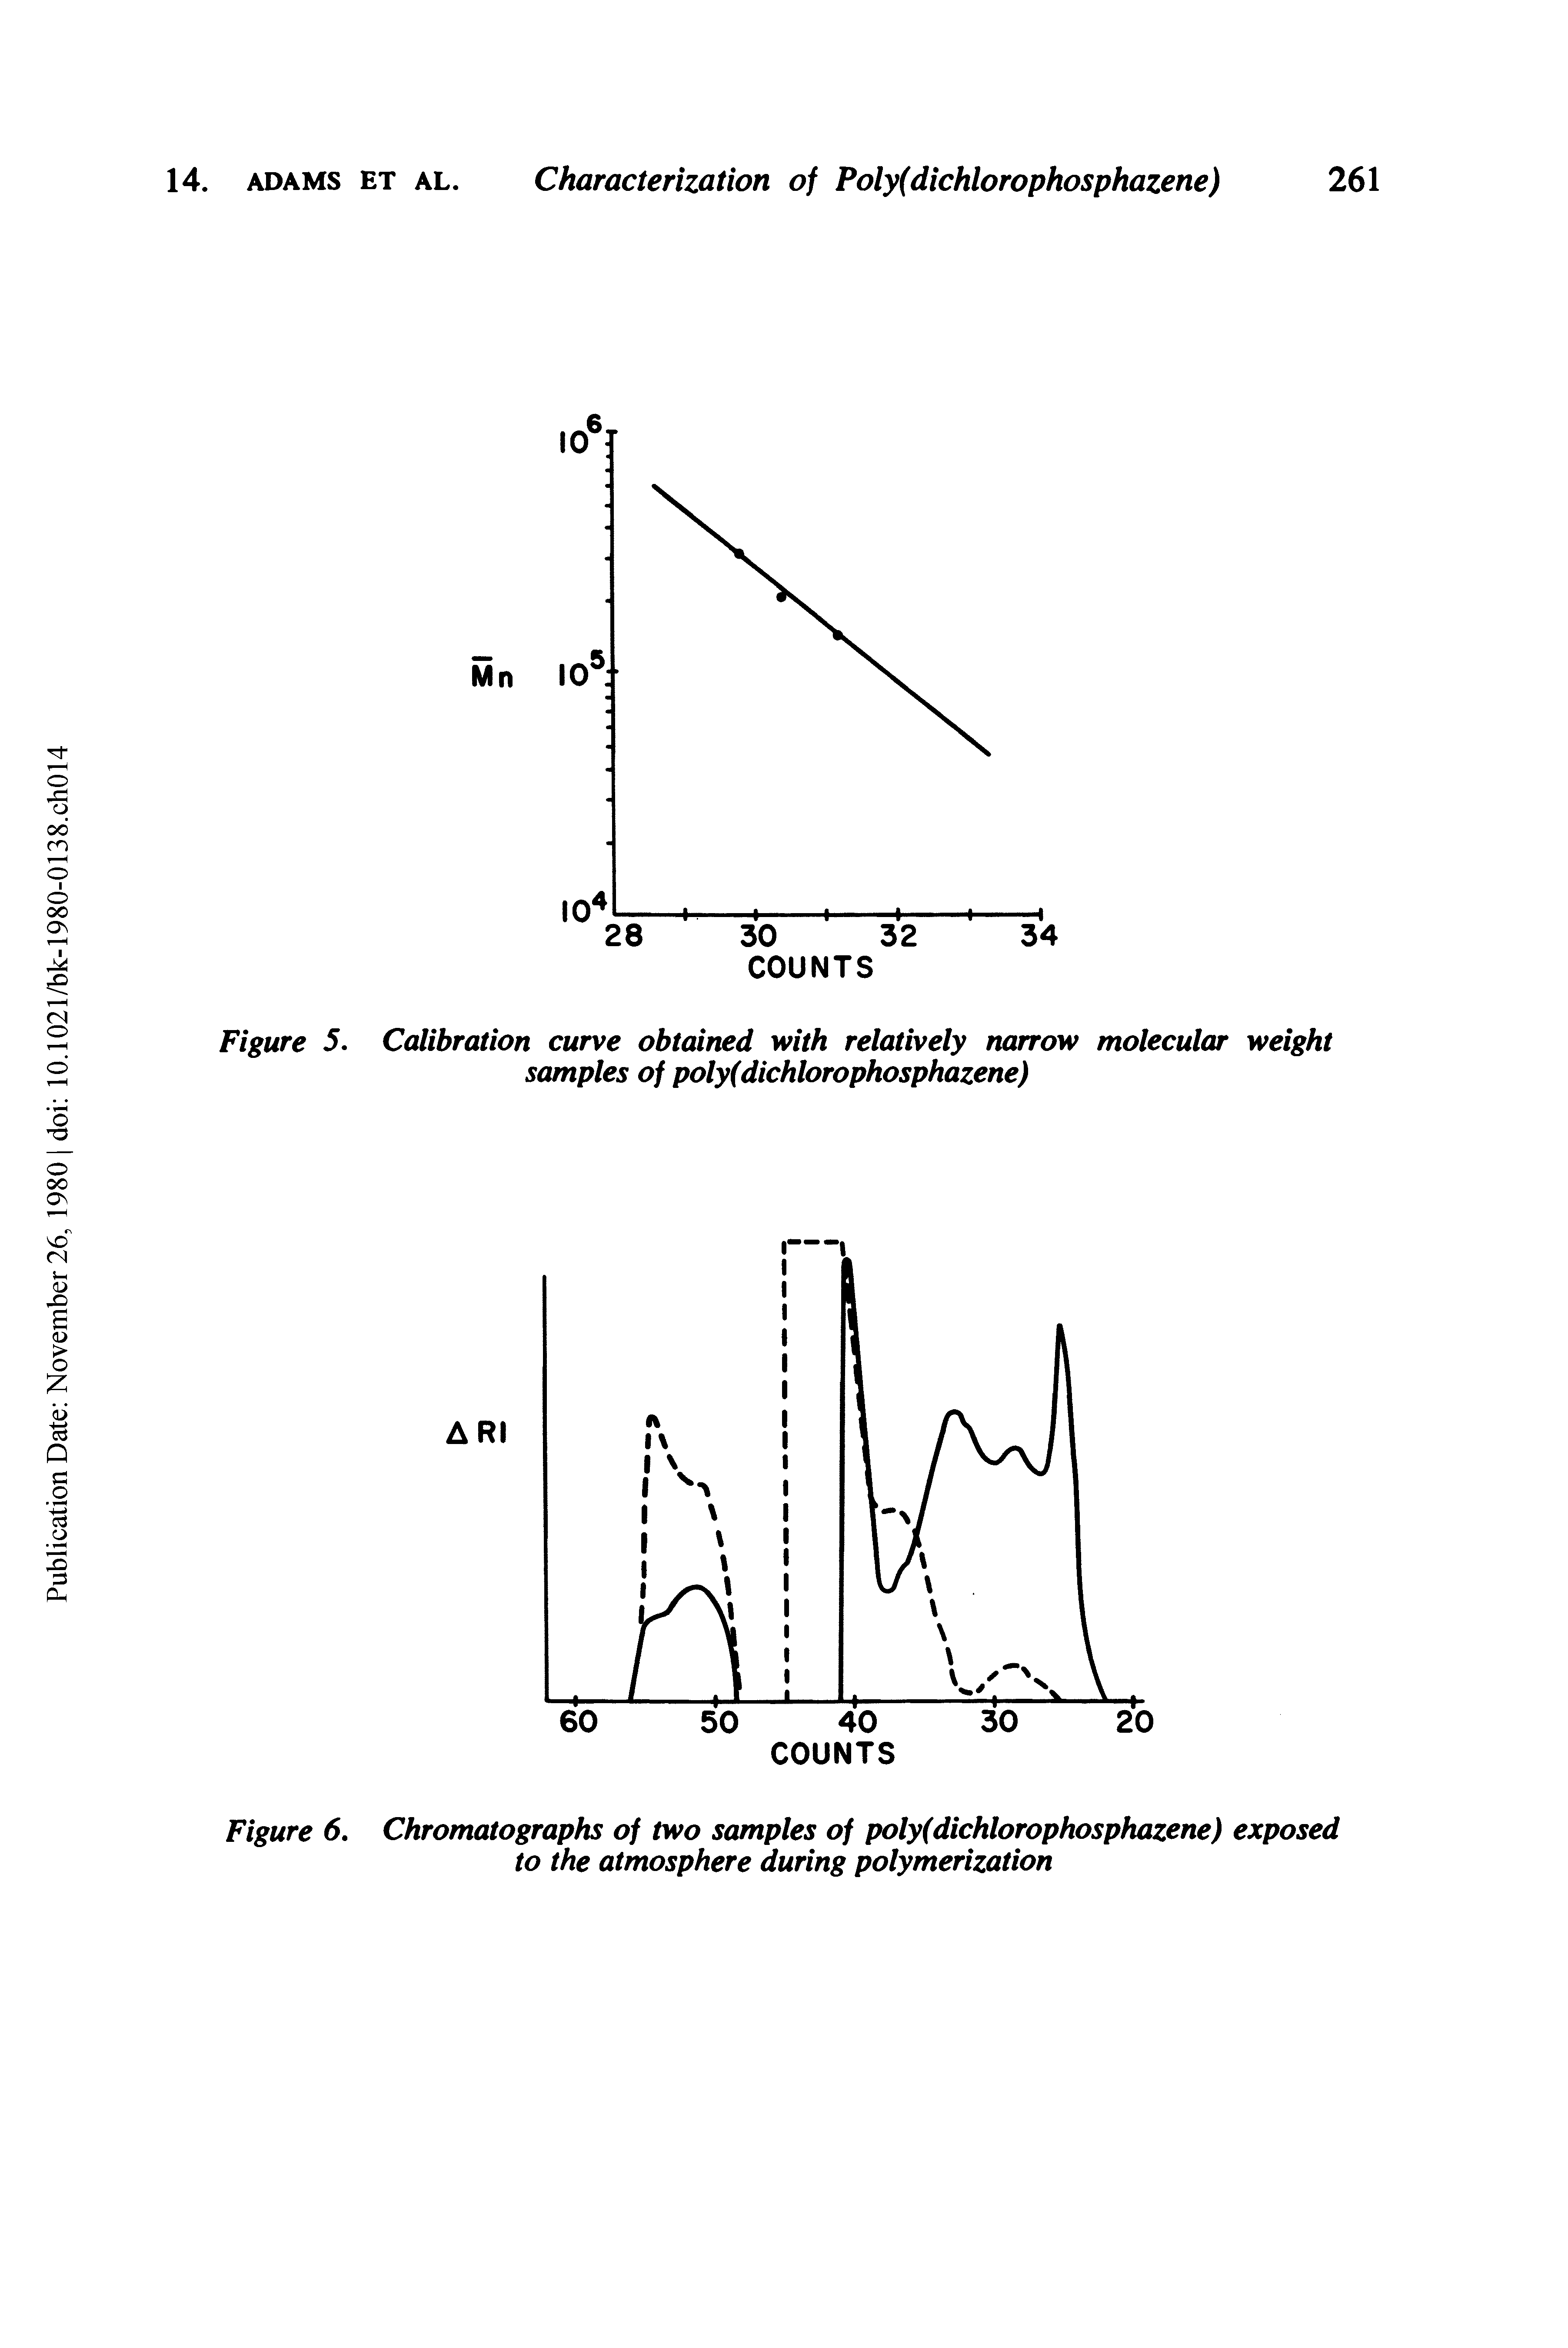 Figure 6. Chromatographs of two samples of poly(dichlorophosphazene) exposed to the atmosphere during polymerization...